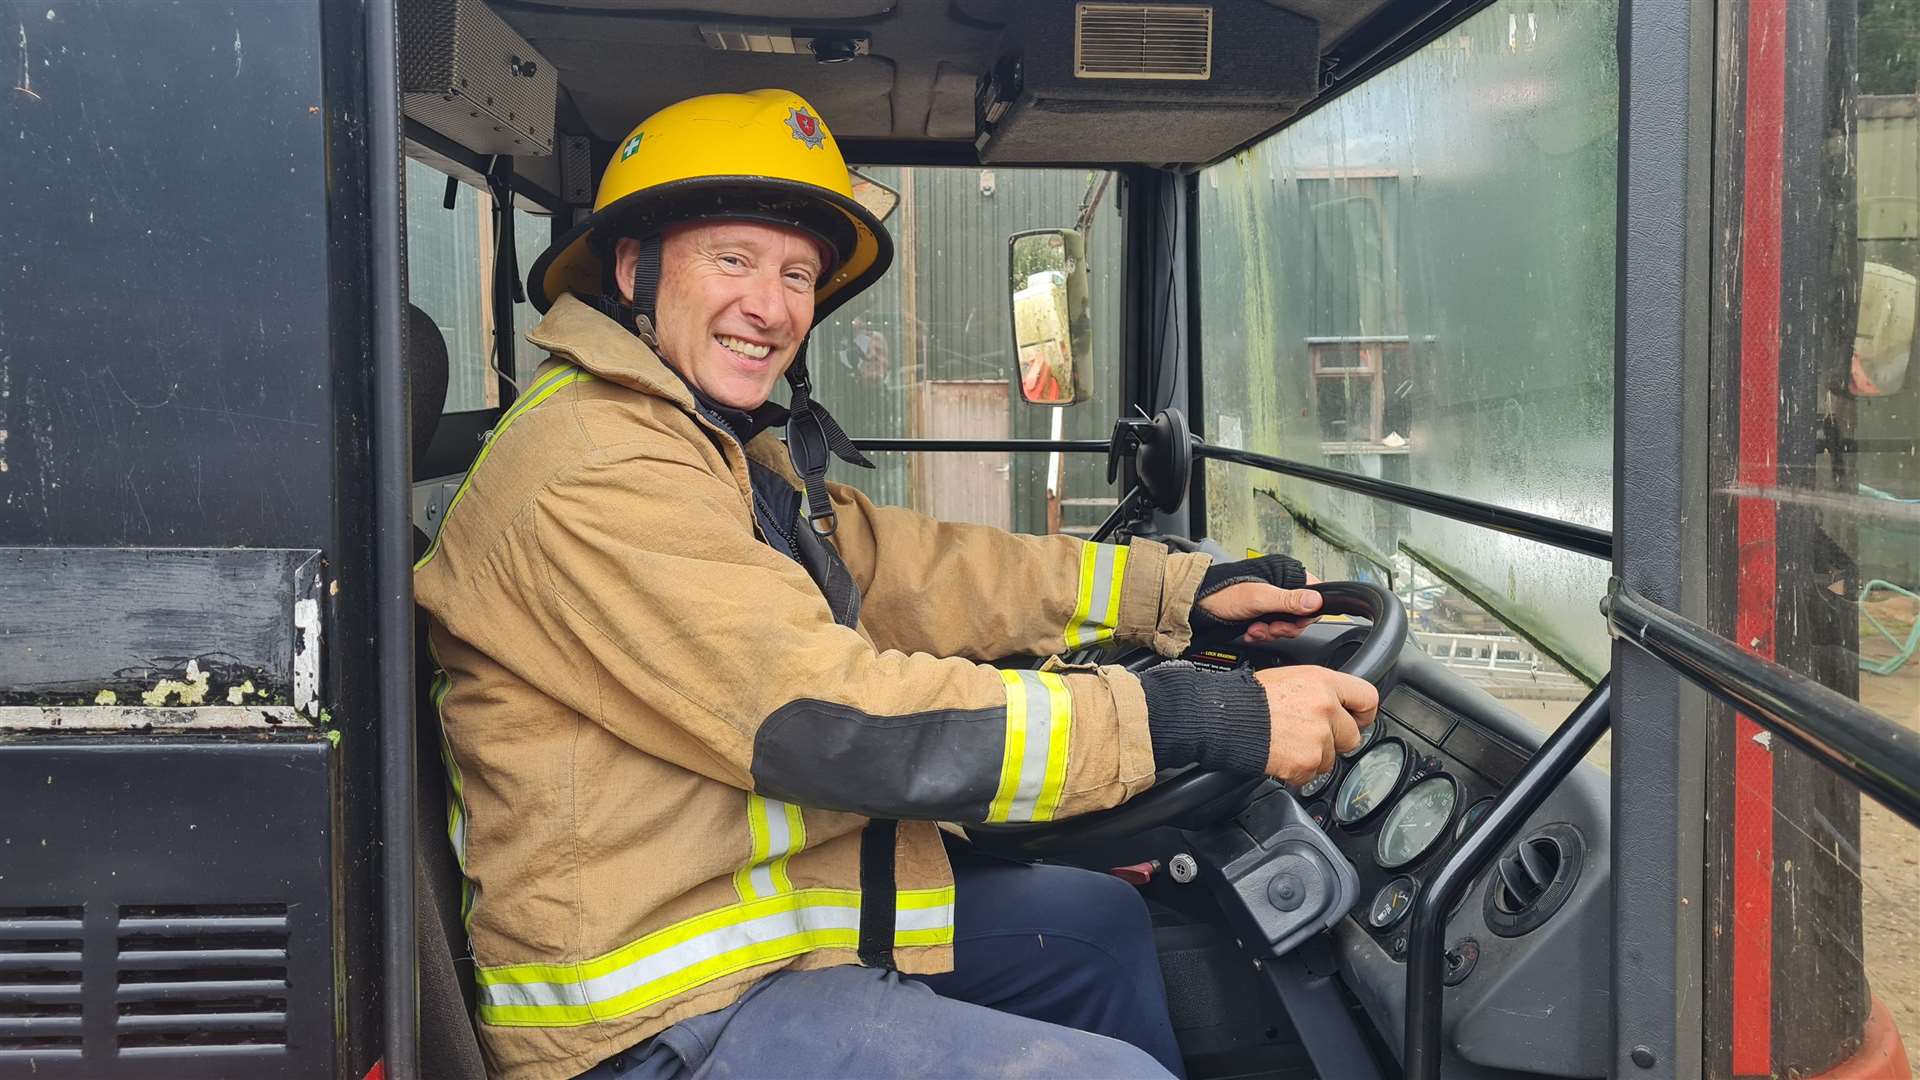 Kris Saxby at the wheel of his fire engine